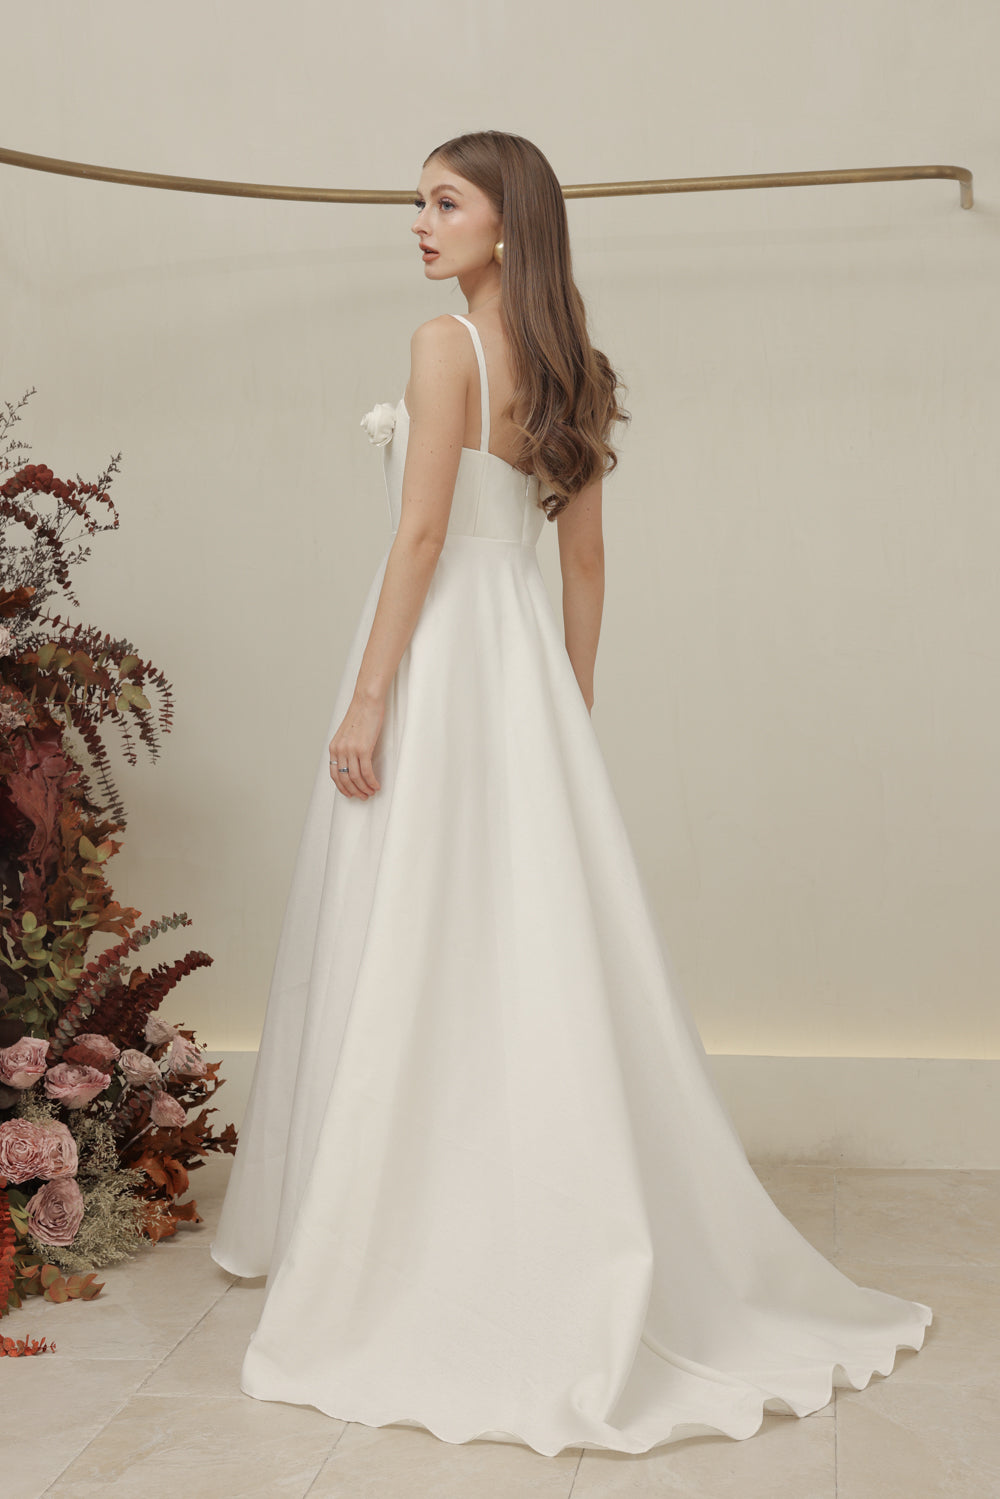 MARCELINE DRESS Straight Neckline Strappy Maxi Gown with Floral Details and Pockets (Ivory White Gazaar)